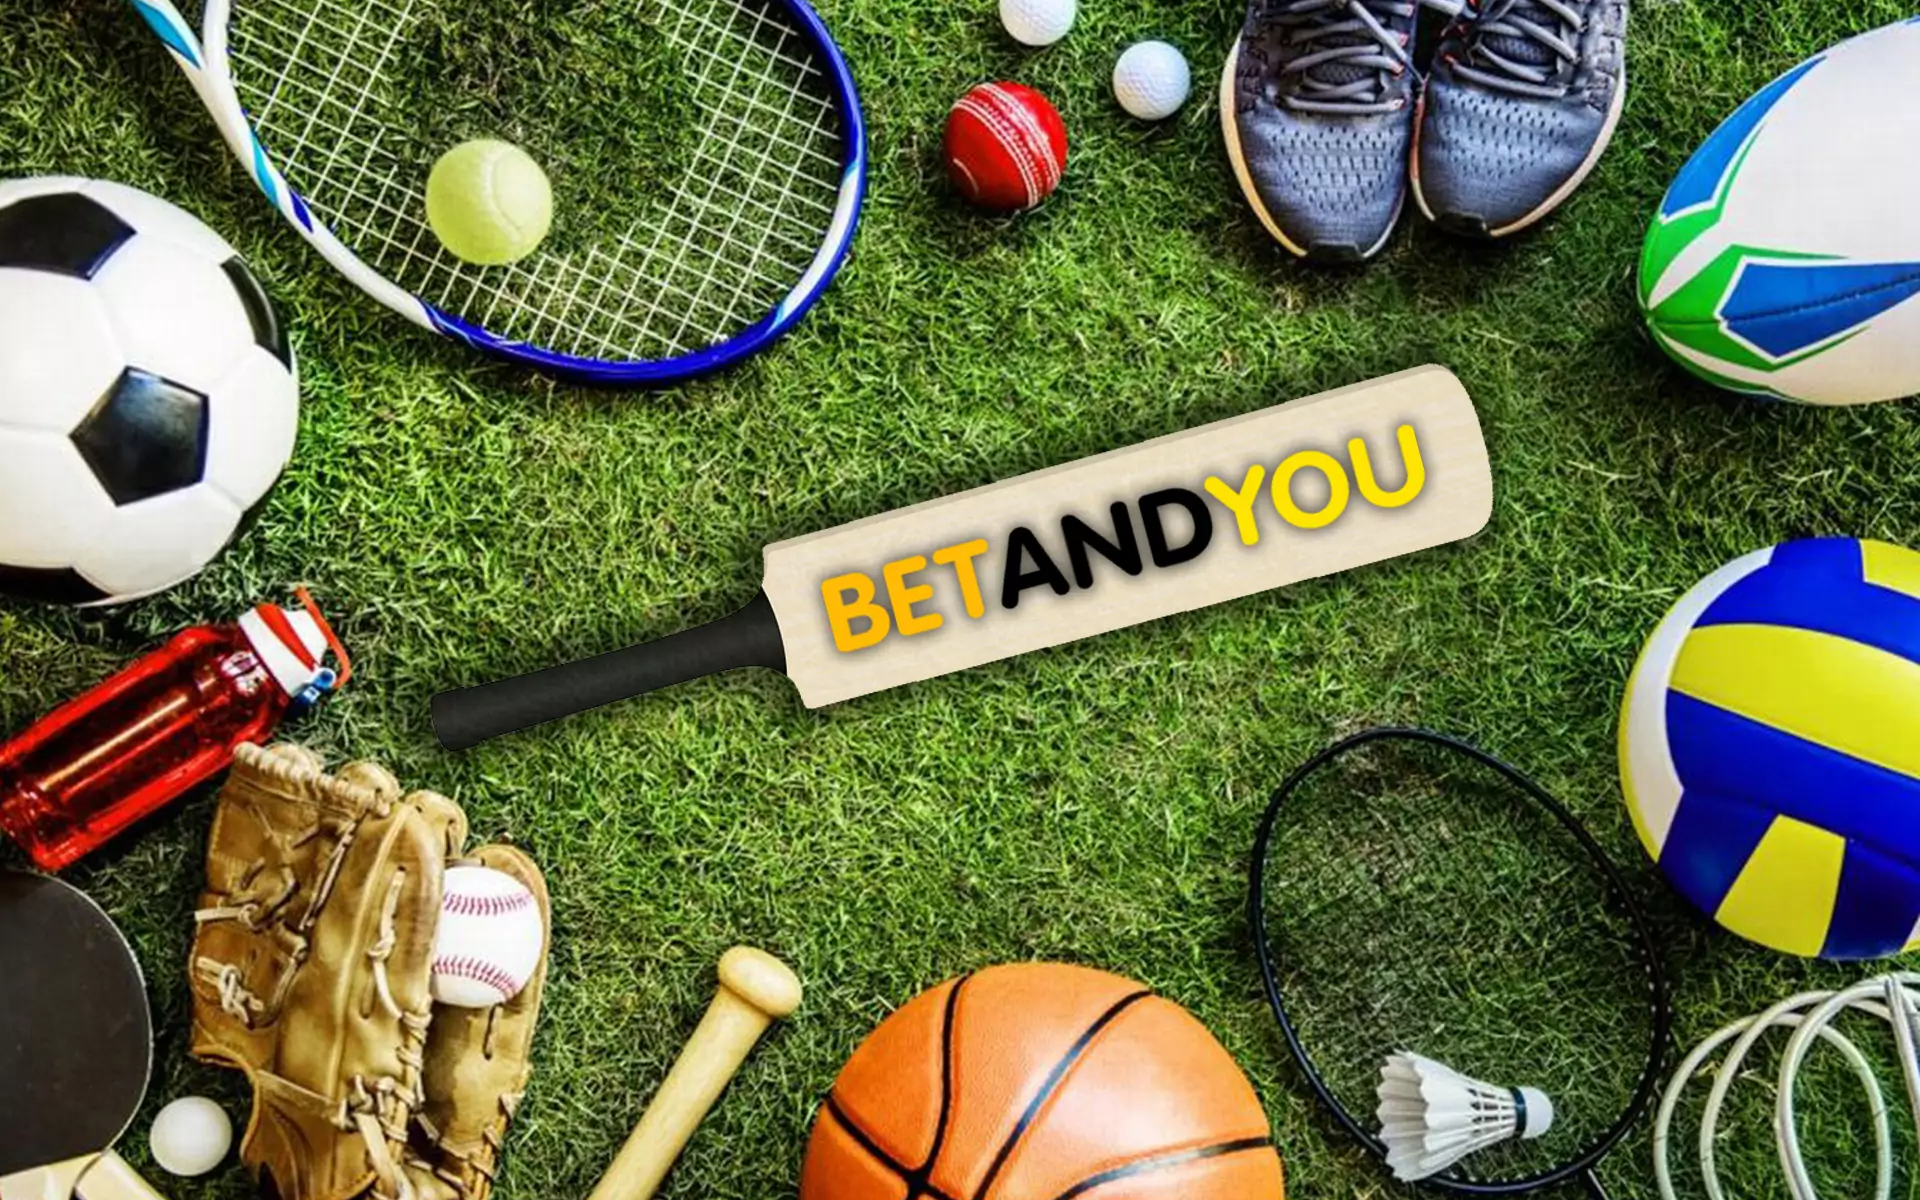 The Betandyou app offers many types for sports betting.